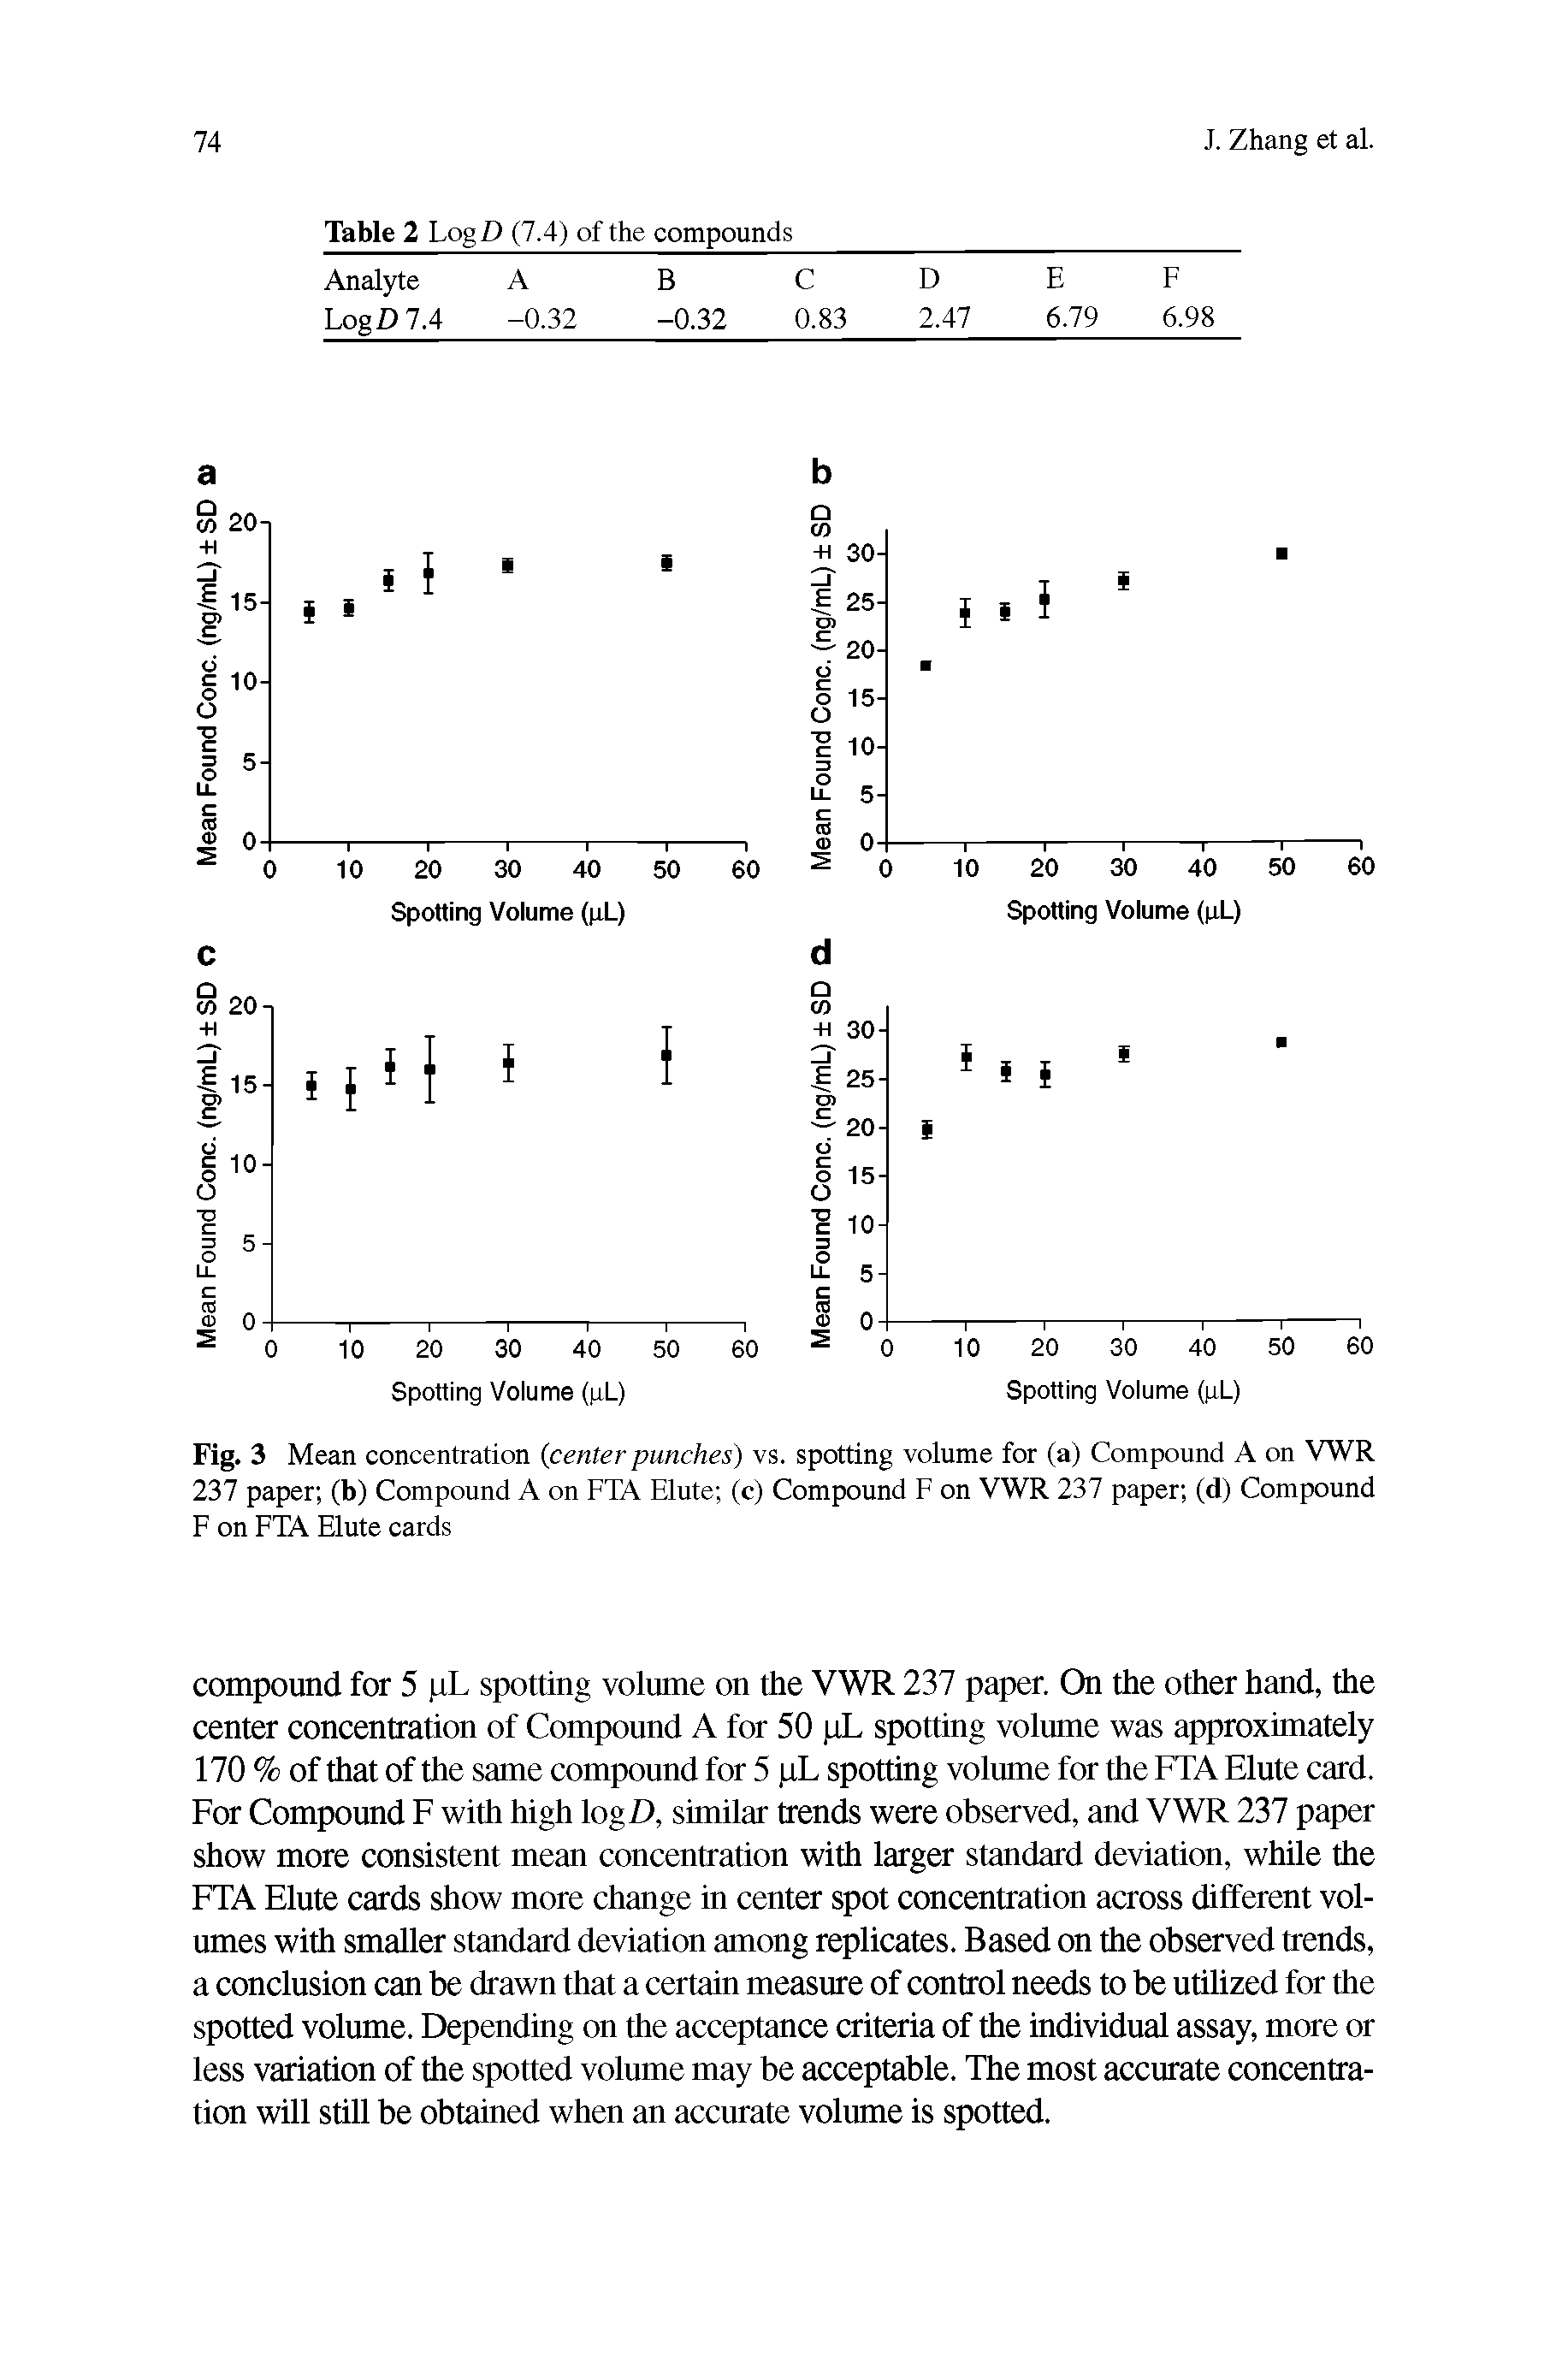 Fig. 3 Mean concentration (center punches) vs. spotting volume for (a) Compound A on VWR 237 paper (b) Compound A on FTA Elute (c) Compound F on VWR 237 paper (d) Compound F on FTA Elute cards...